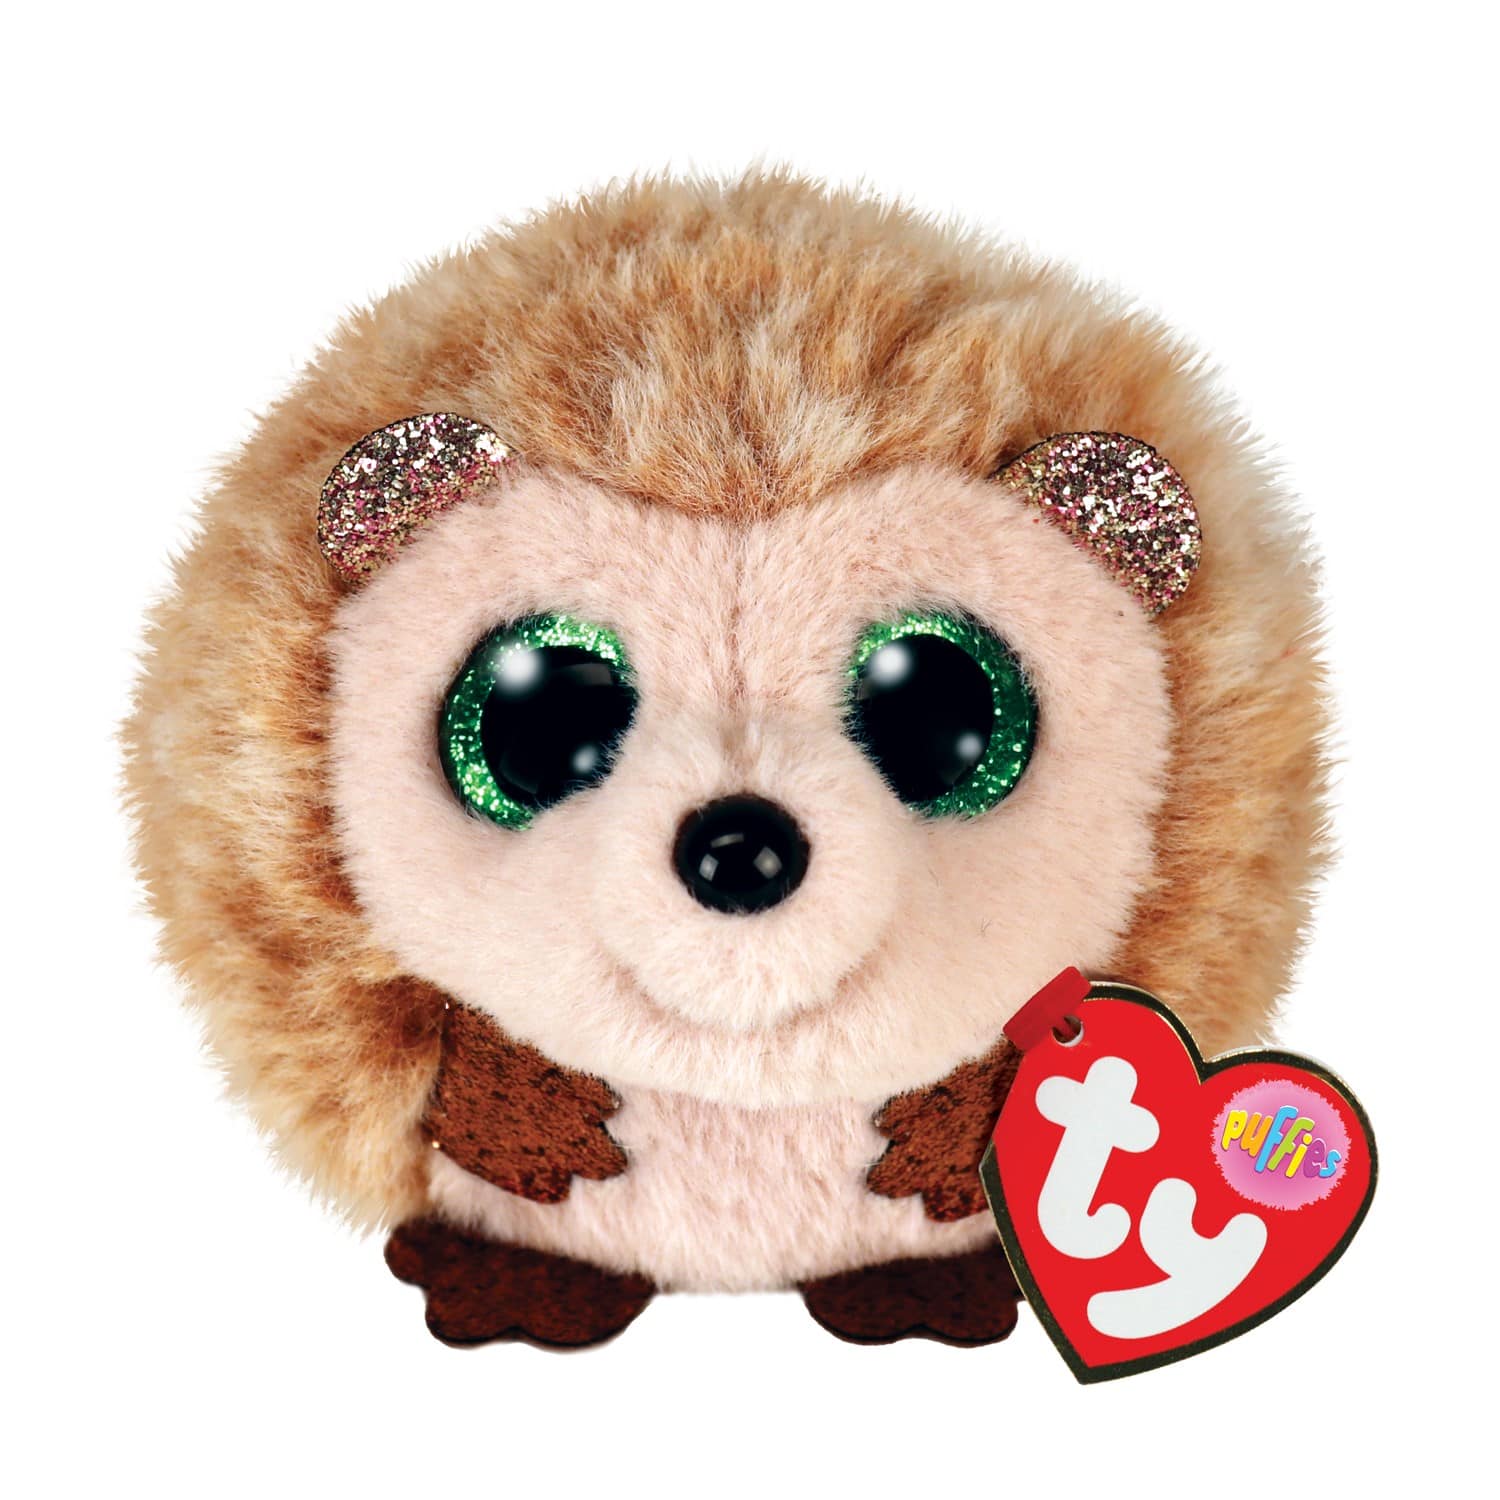 Find the Ty Beanie Boos™ Chewey Chihuahua, Regular at Michaels